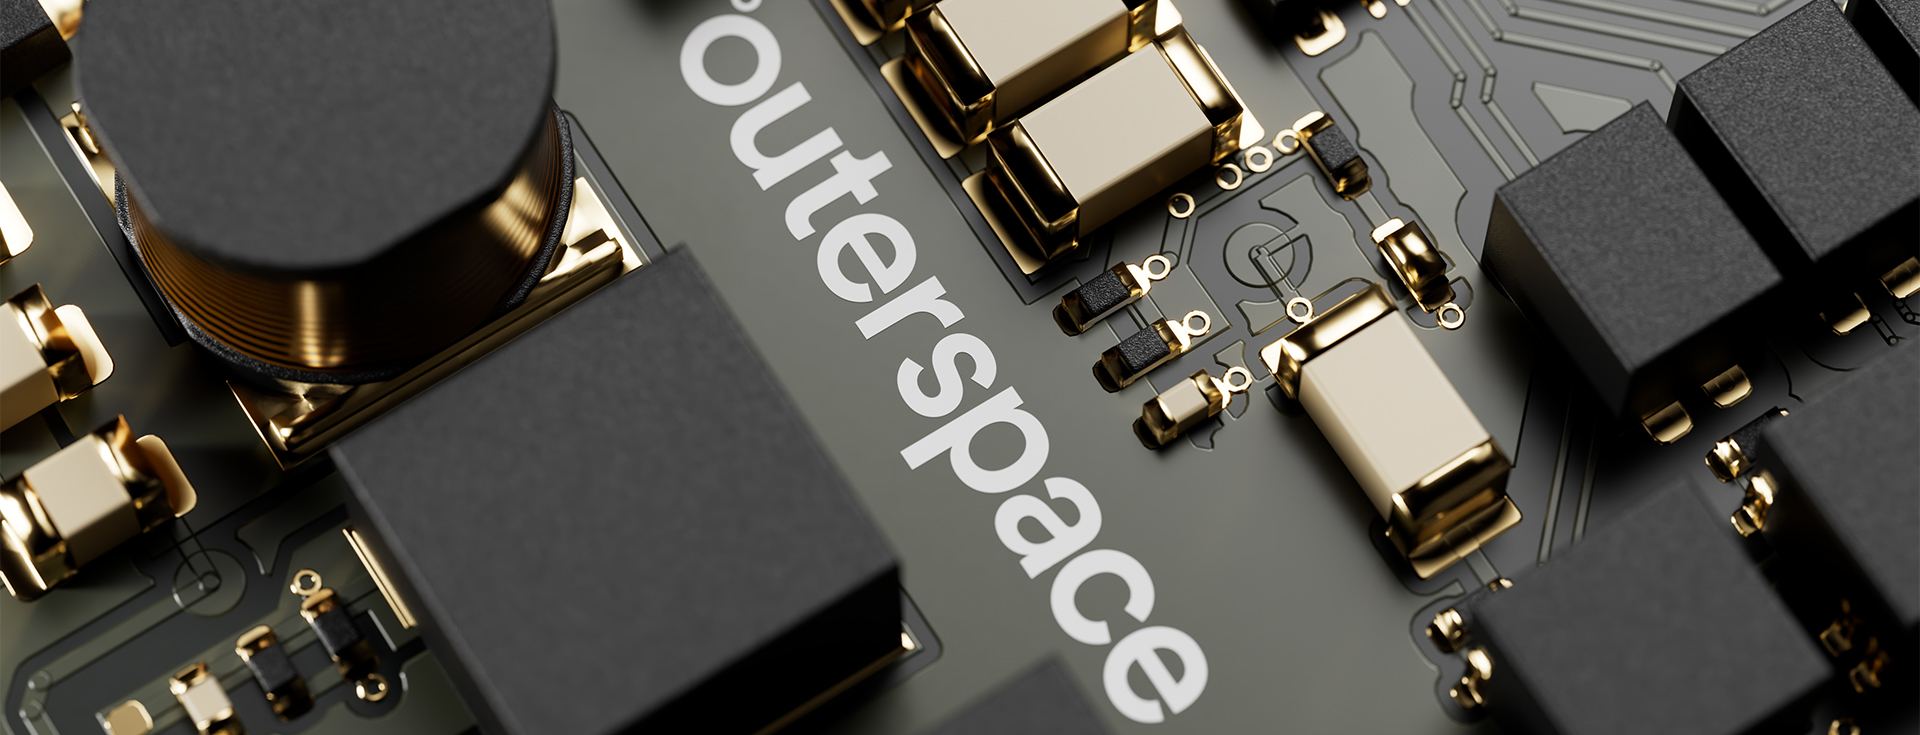 electronic engineering at outerspace design